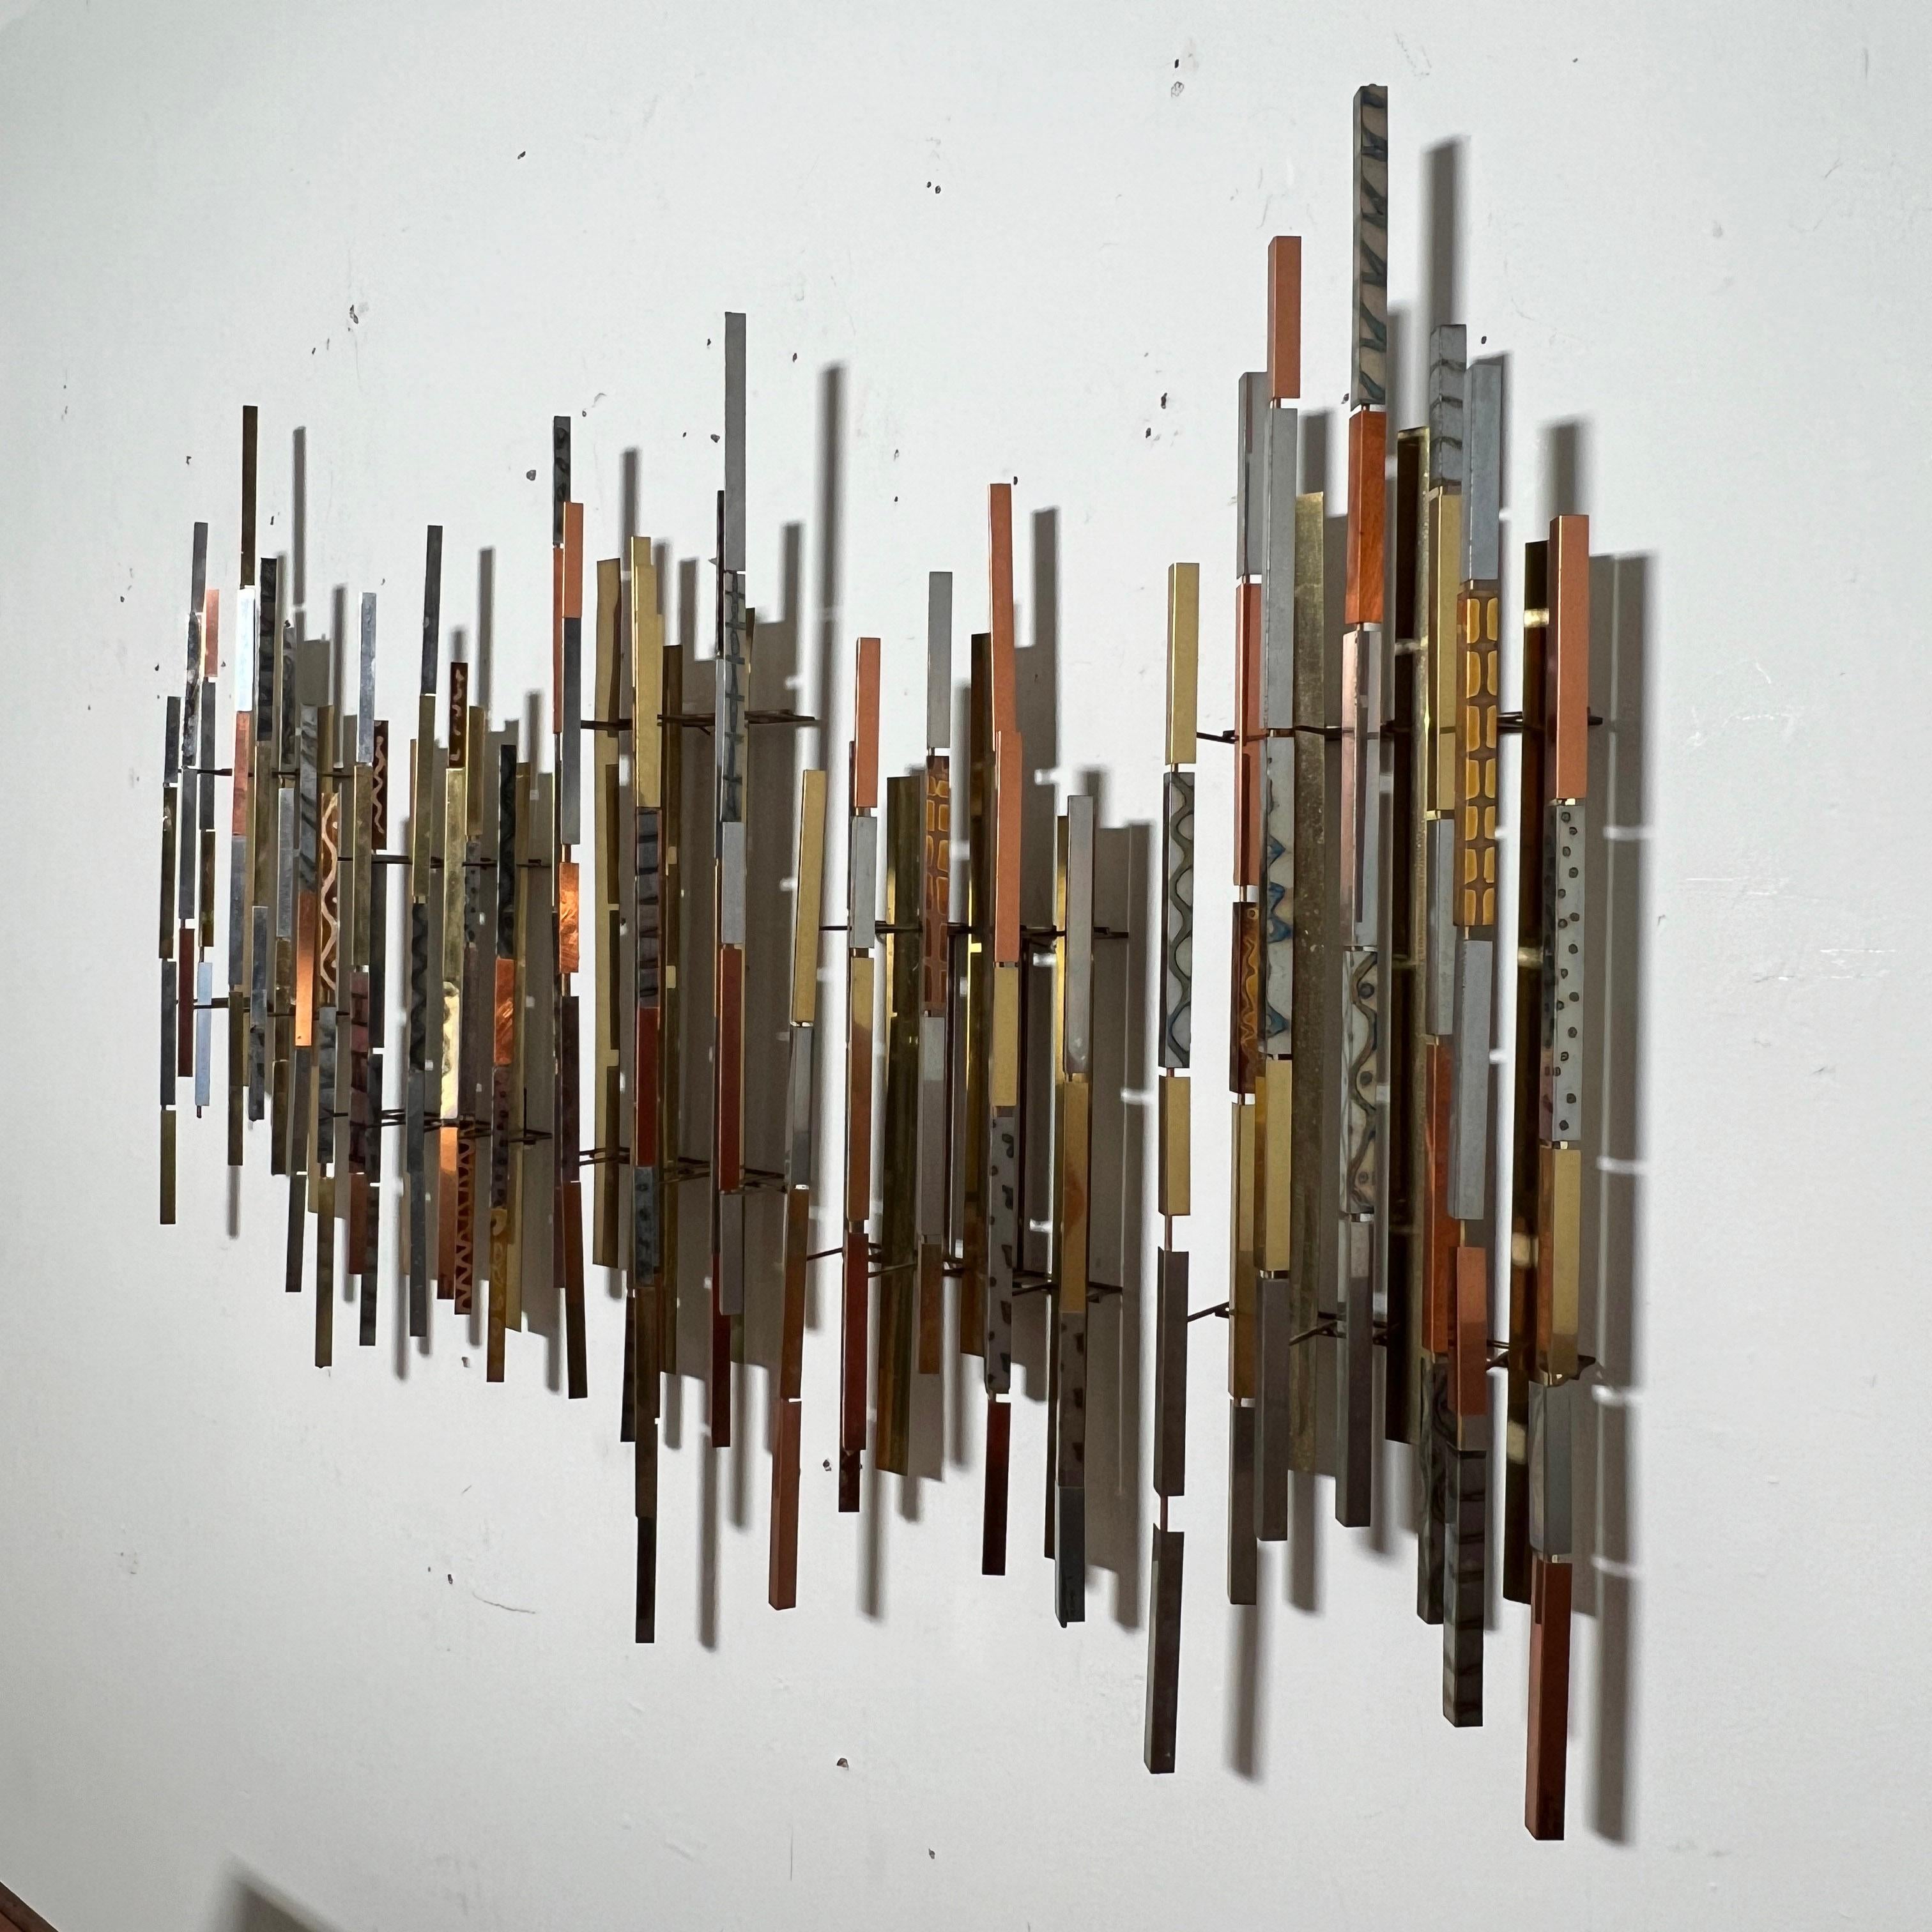 An assemblage of five architectural metalwork wall sculptures by the noted Baltimore, MD artist Raymond Herbert Berger (1929-2017). They can be arranged vertically (as shown) or horizontally to suit any wall space and each is signed individually and